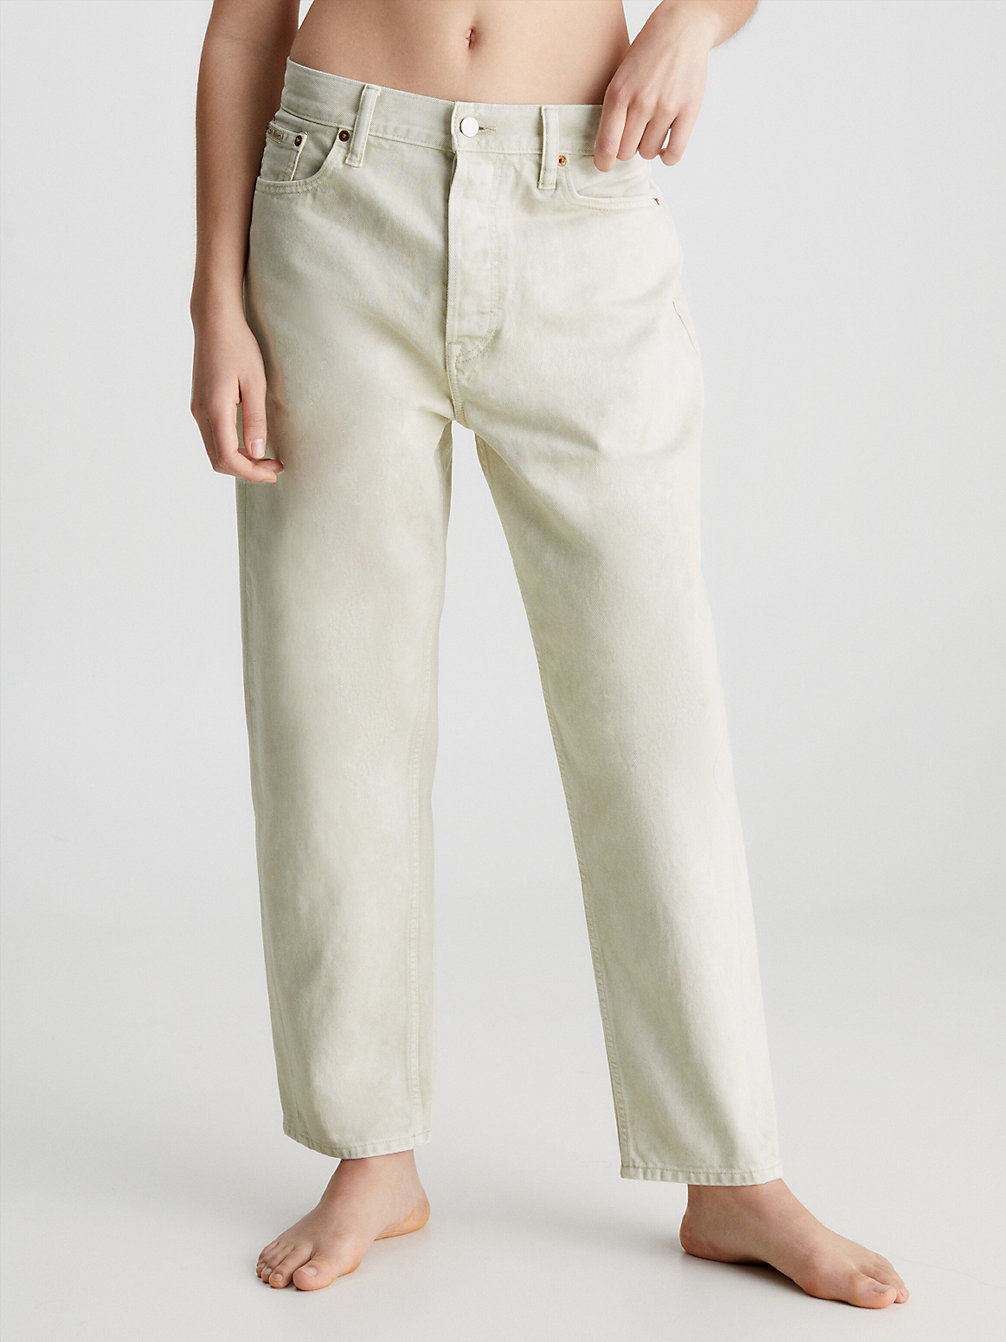 Unisex Relaxed Jeans - CK Standards > MARBLE UNBLEACHED > undefined uomo > Calvin Klein